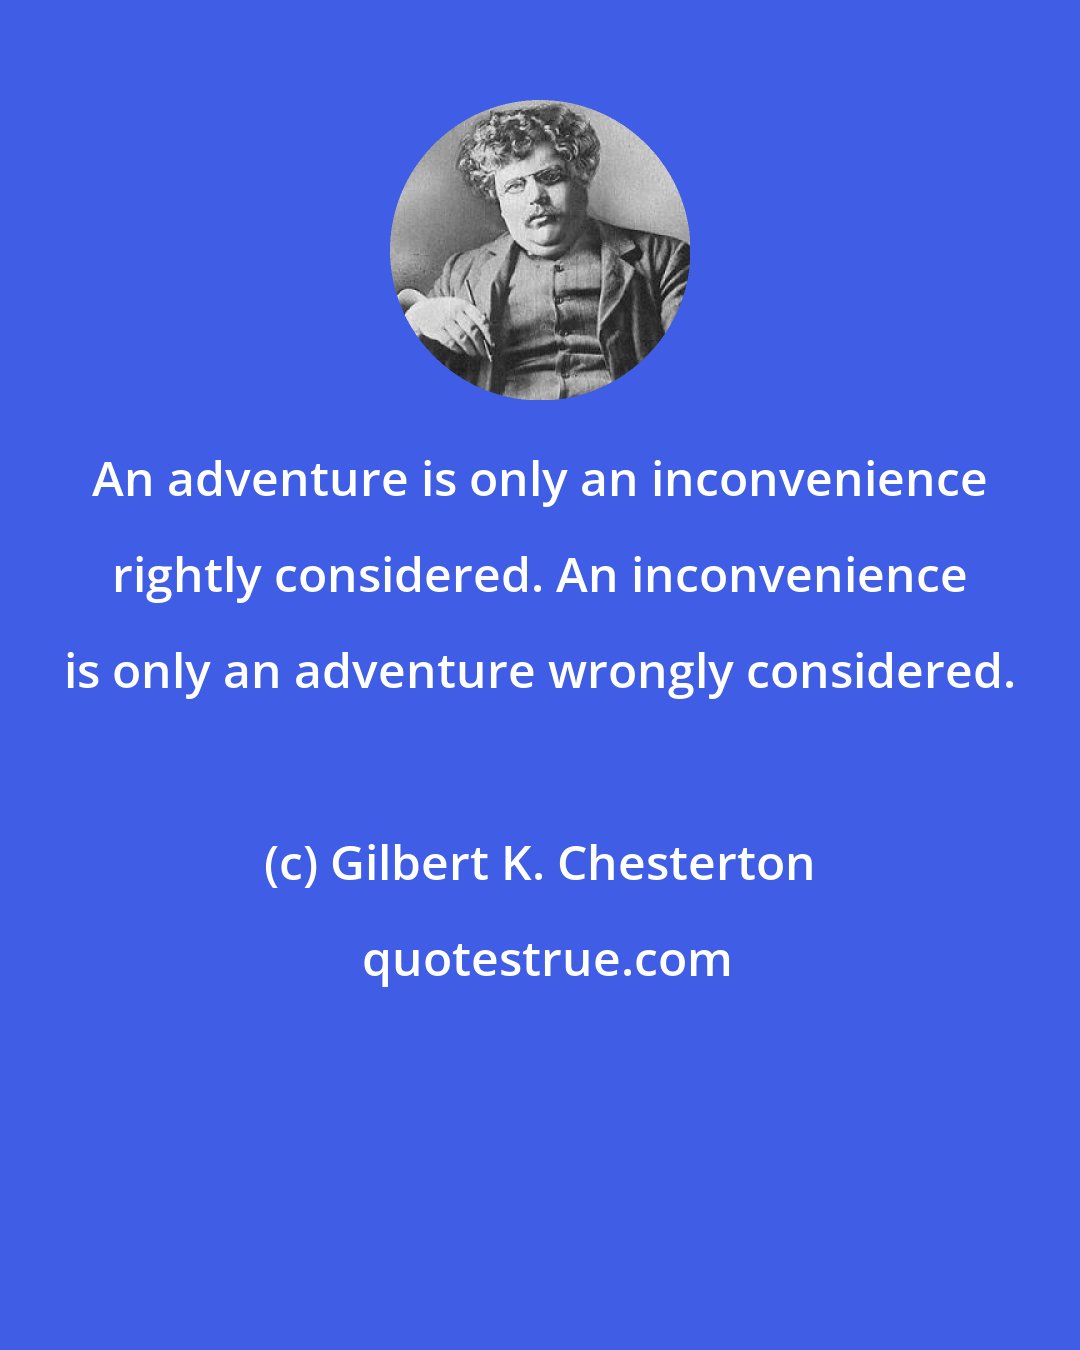 Gilbert K. Chesterton: An adventure is only an inconvenience rightly considered. An inconvenience is only an adventure wrongly considered.